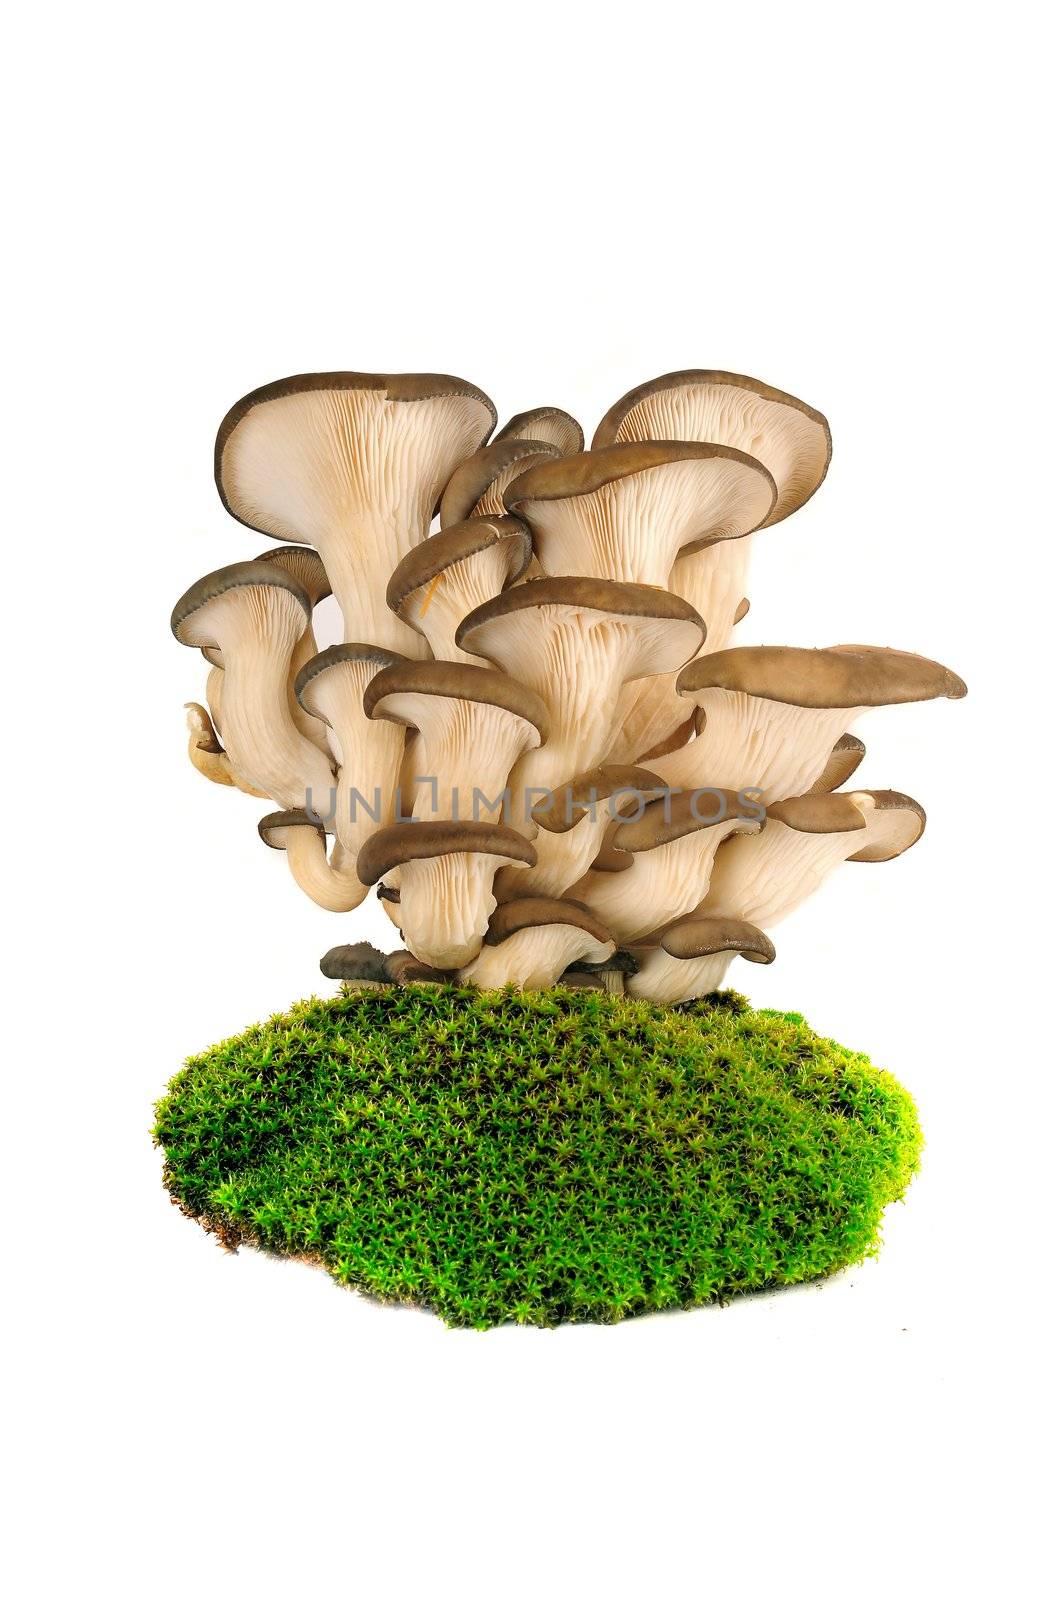 Oyster mushrooms by panbazil